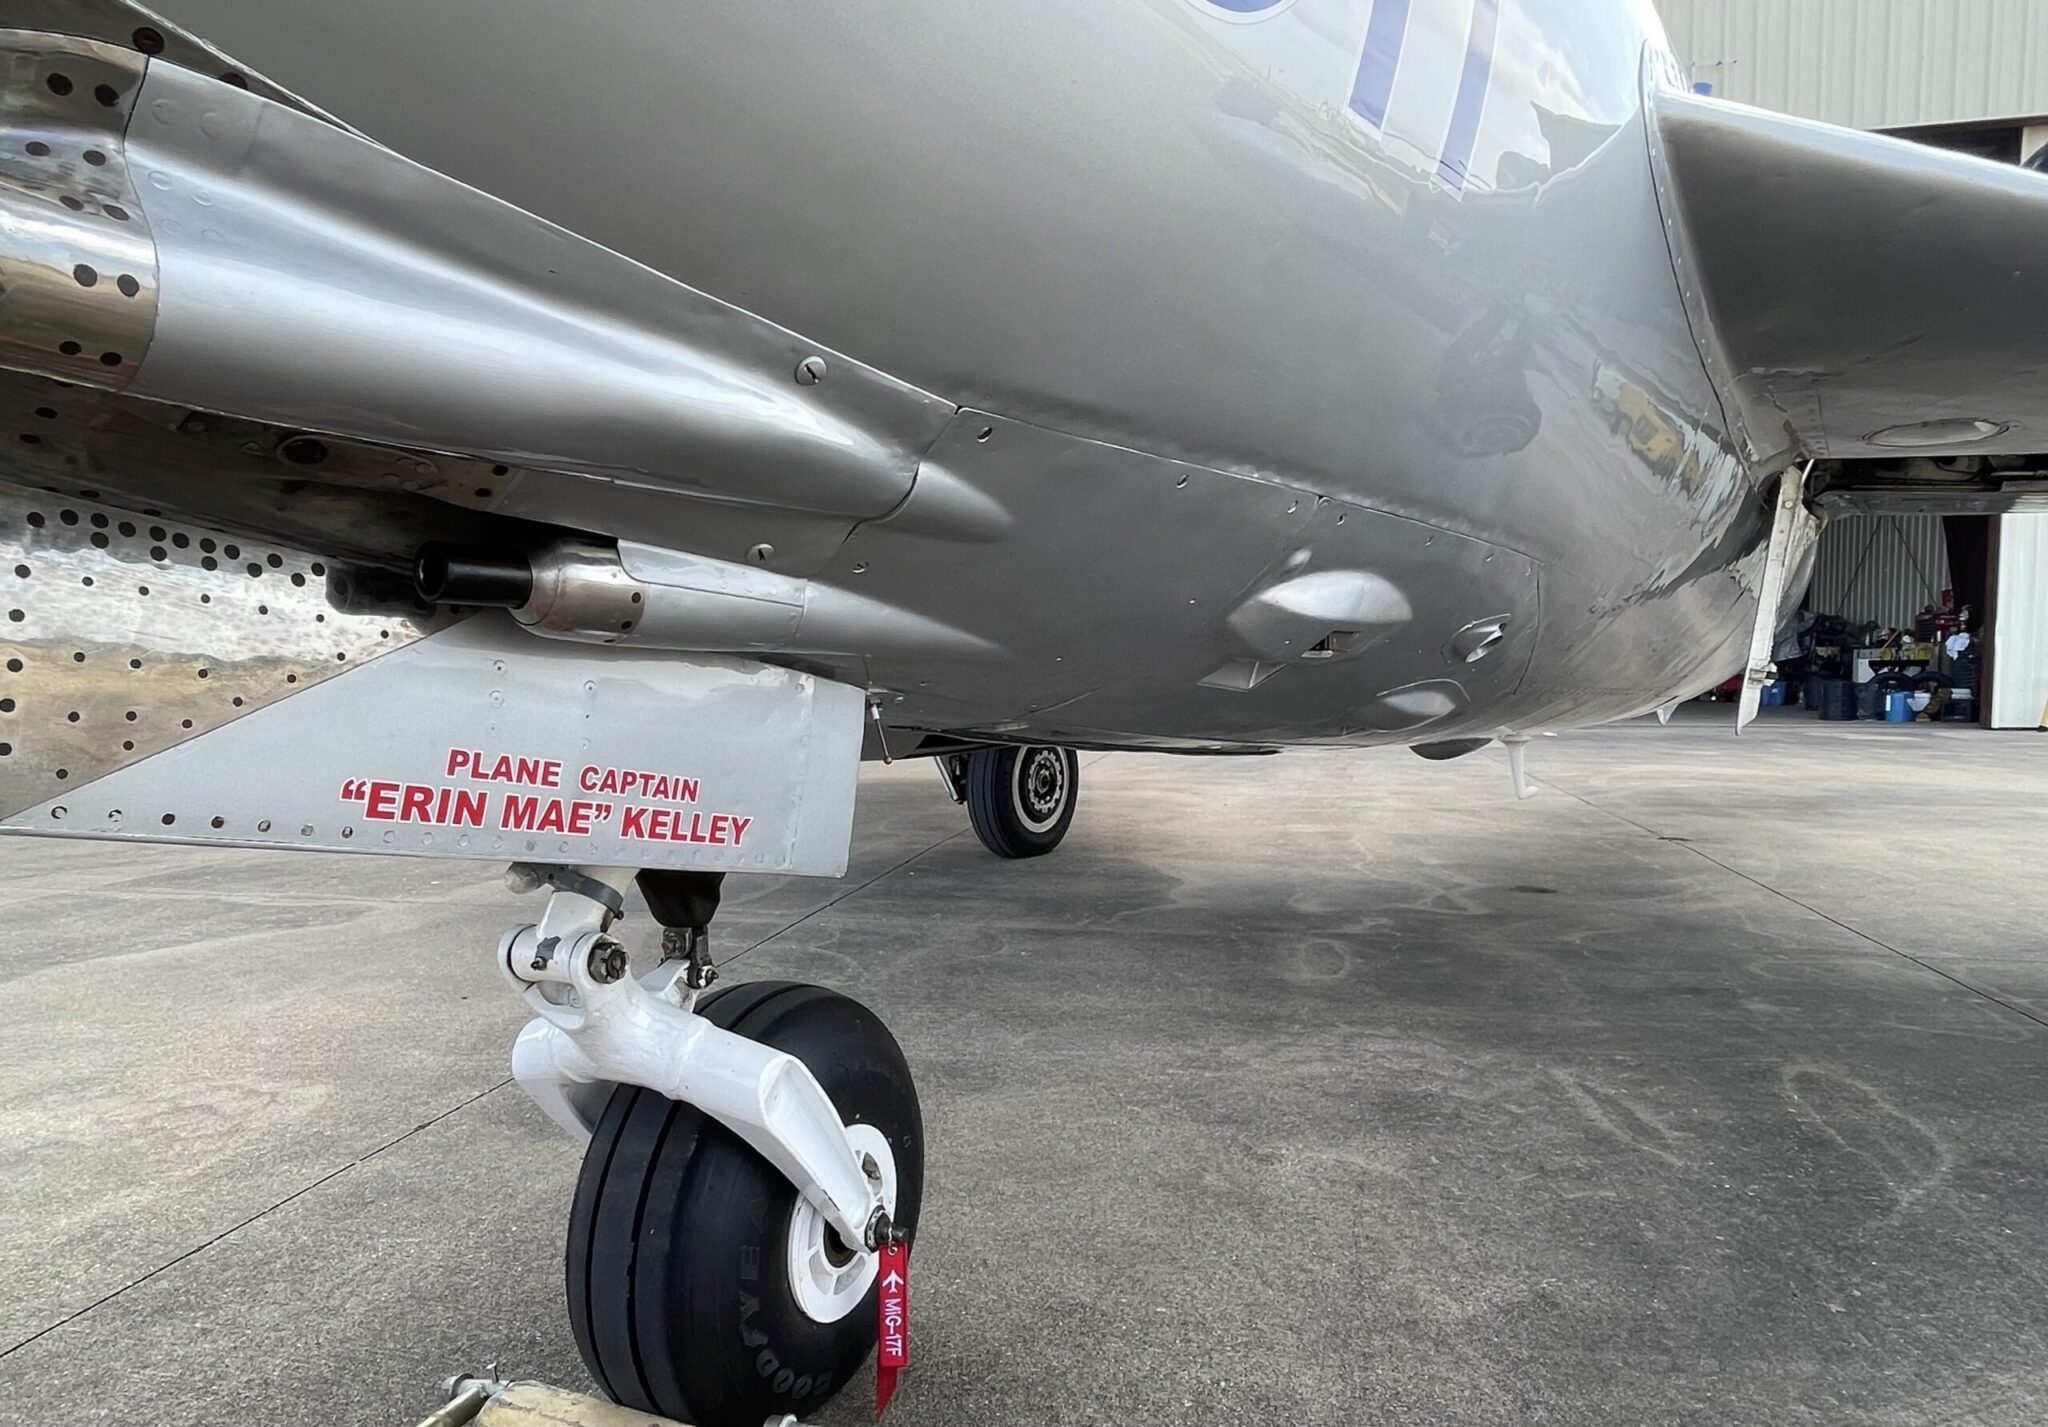 Remove before flight pull – FIGHTERJETS INC